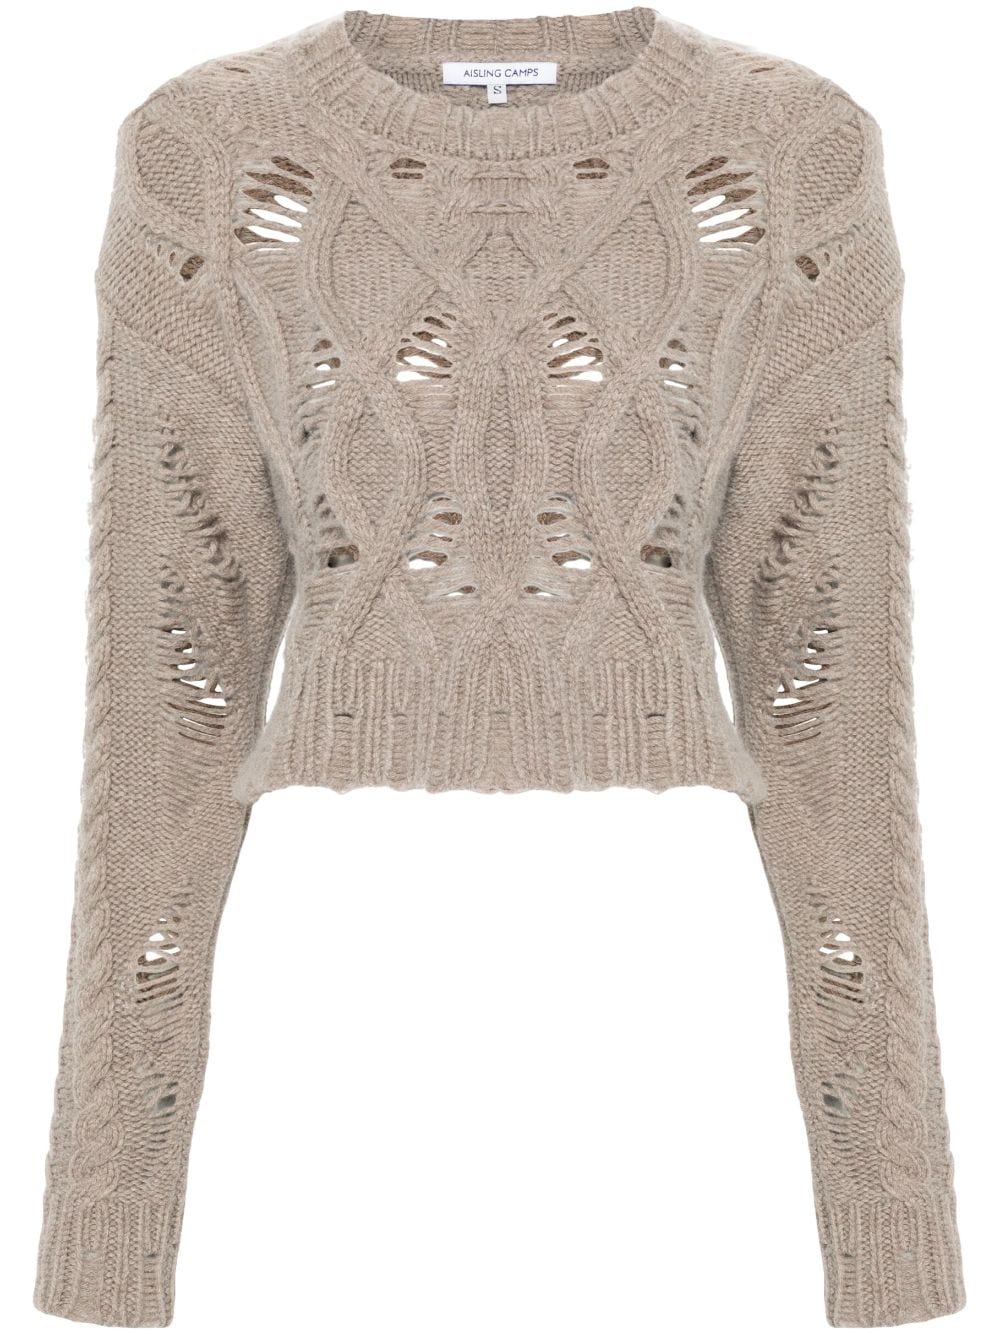 AISLING CAMPS cable-knit cropped sweater - Grey von AISLING CAMPS